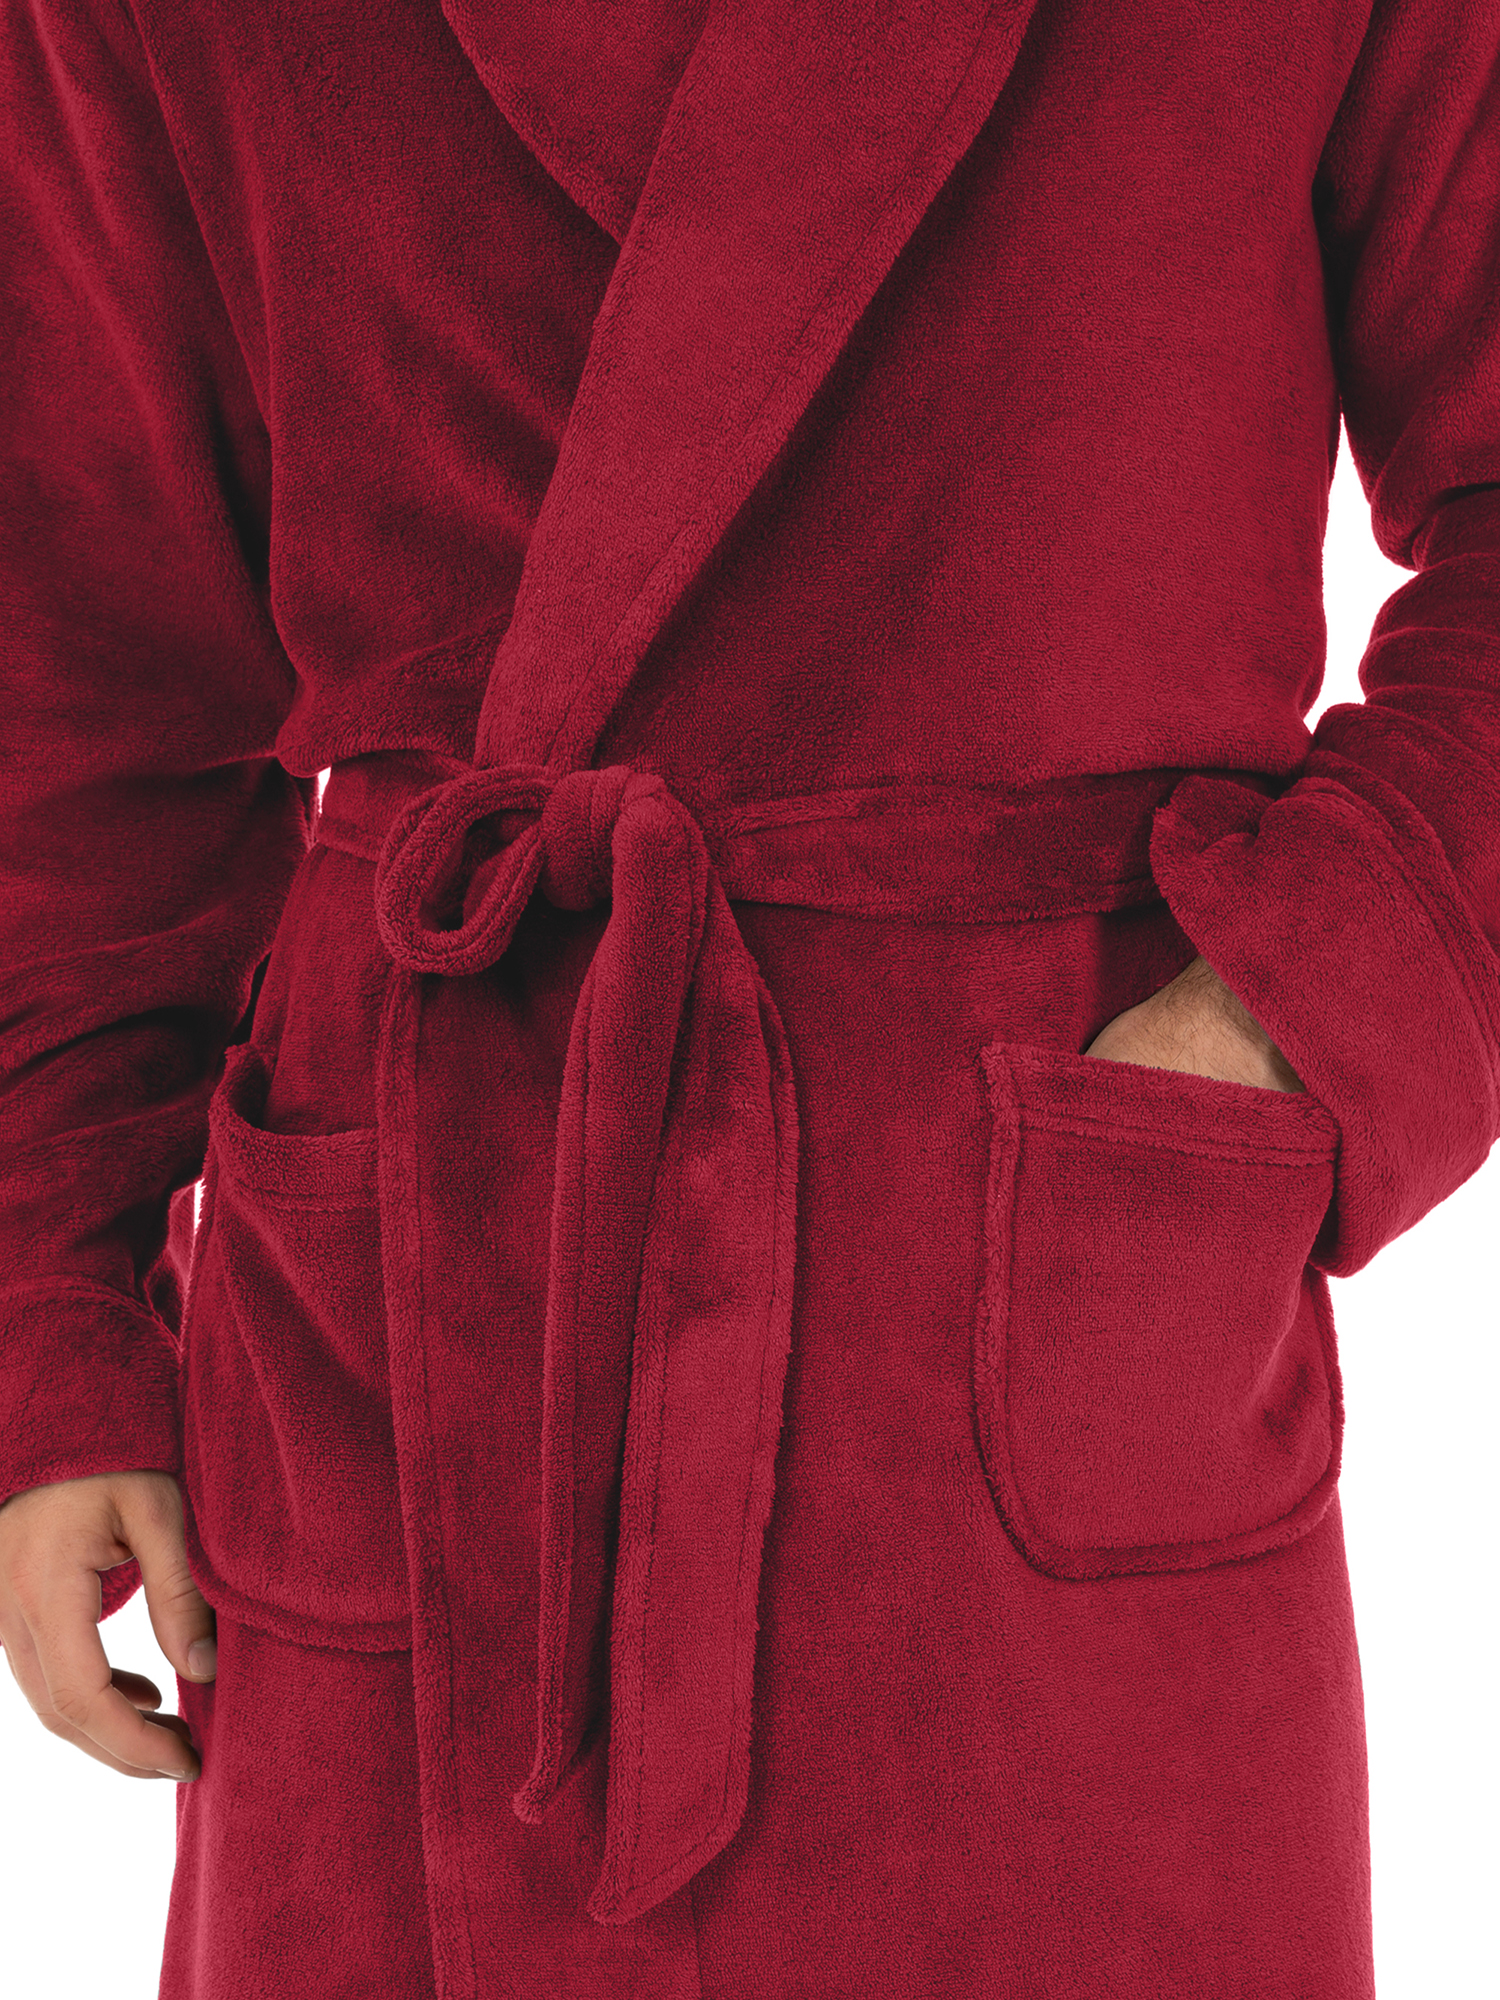 Fruit of the Loom Adult Mens Solid Plush Fleece Bathrobe One Size - image 4 of 4